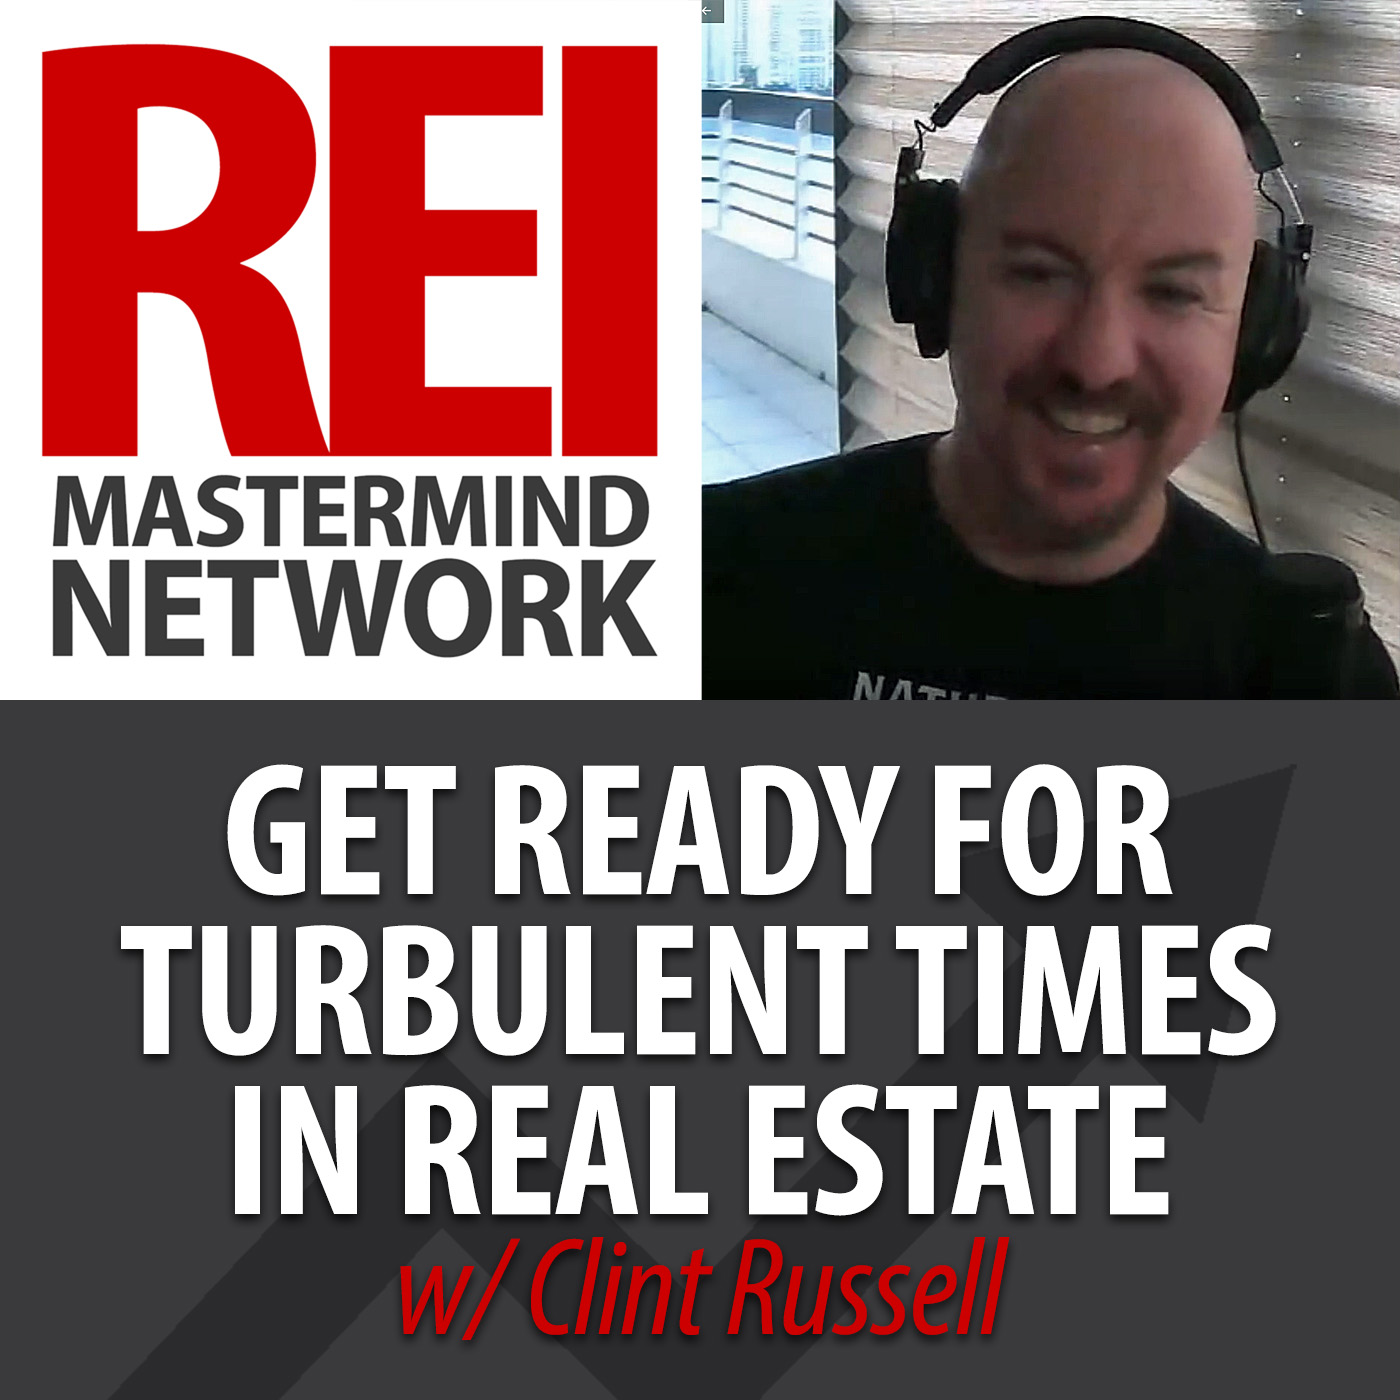 Get Ready for Turbulent Times In Real Estate with Liberty Lockdown's Clint Russell